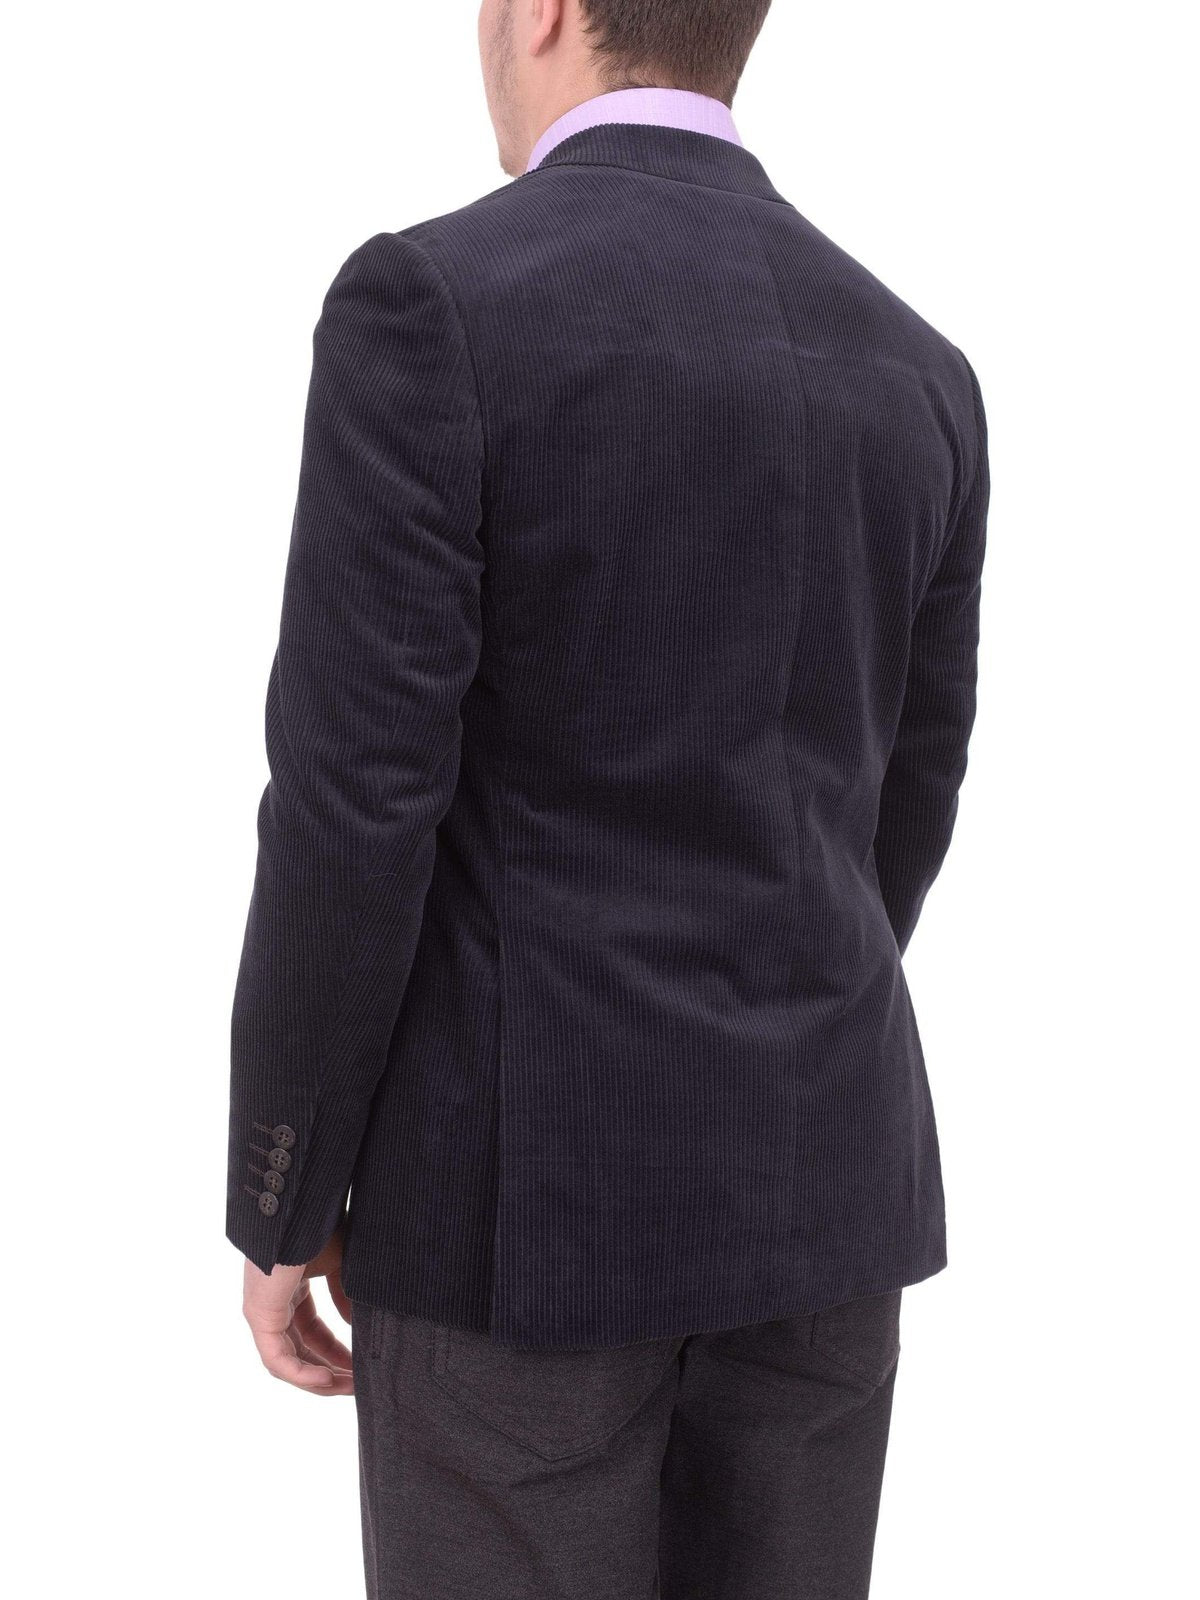 Back View of Navy Corduroy Cotton Sportcoat